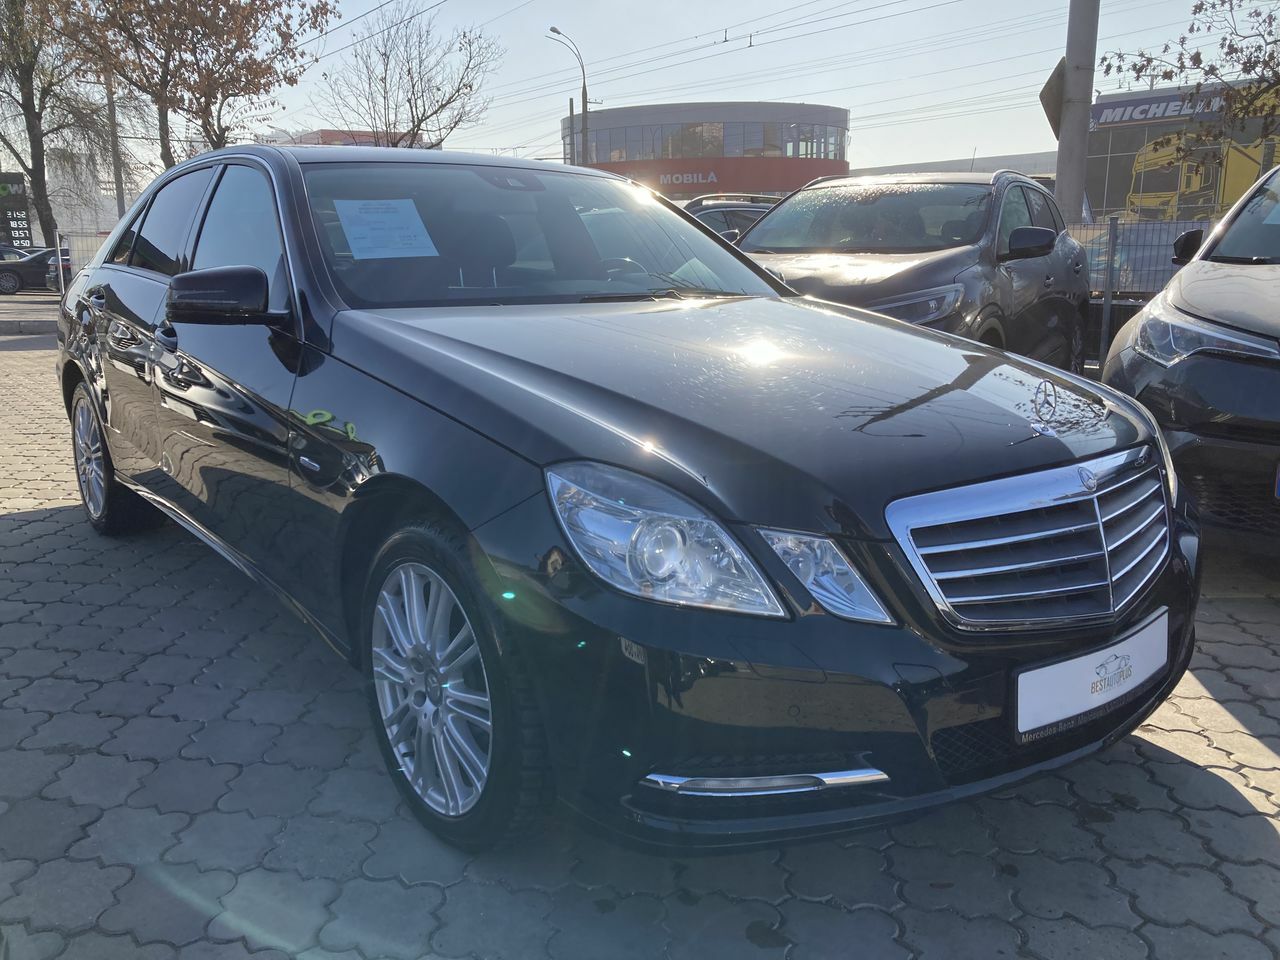 <span style="font-weight: bold;">mercedes e 250 4matic&nbsp;</span>